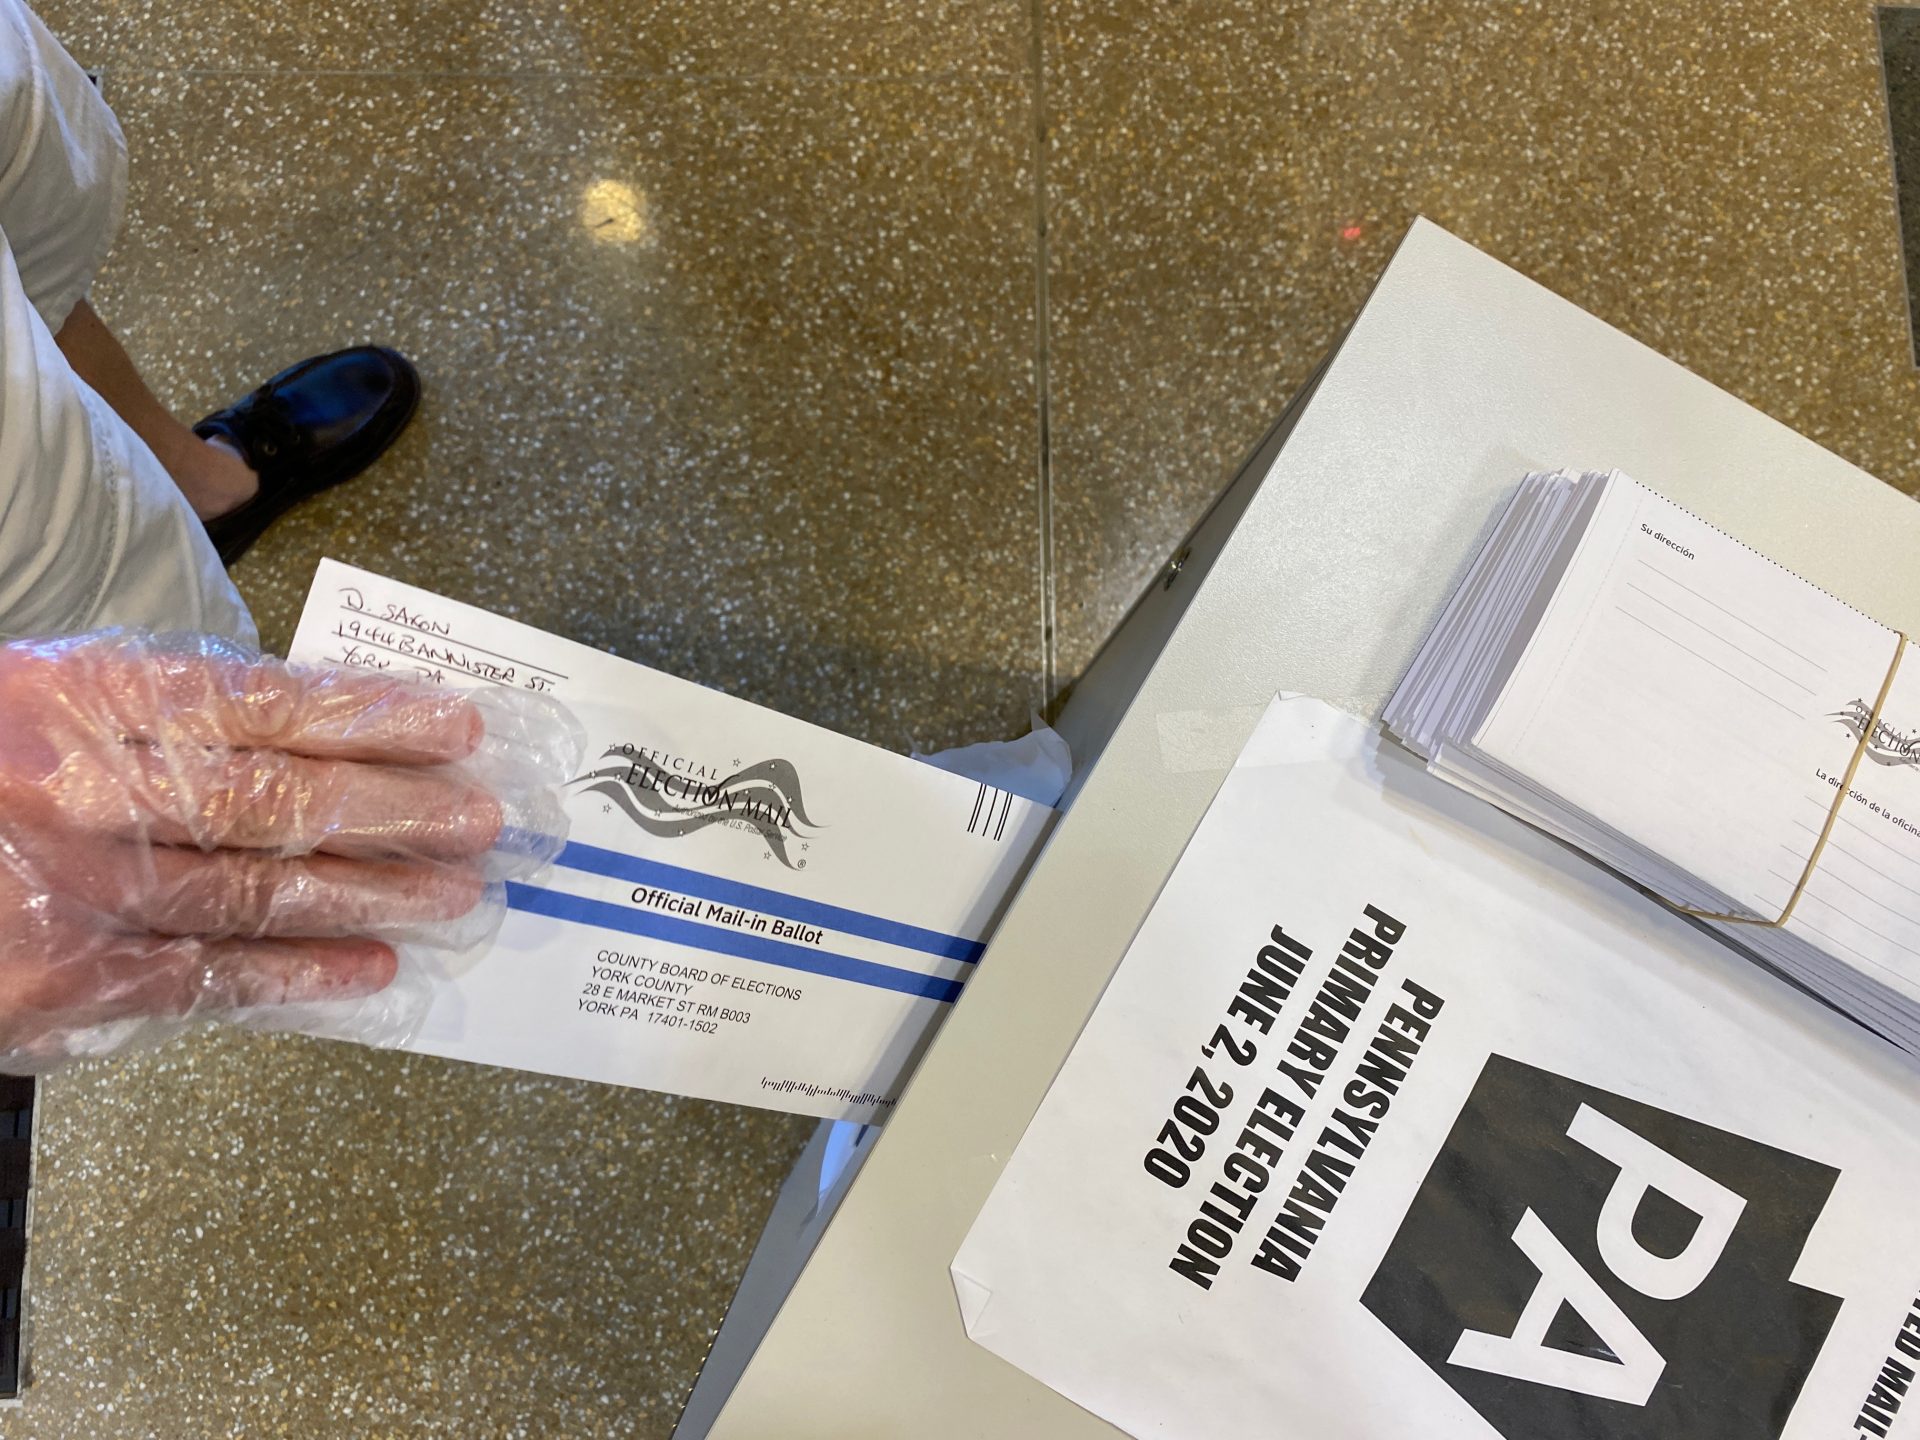 York County offered voters a dropbox for mailed ballots at its government center ahead of the primary June 2. Rules for hand delivering ballots are among issues at the focus of a federal lawsuit over Pennsylvania's election procedures filed by President Donald Trump's re-election campaign. The case is but one source of uncertainty complicating state election code reforms and planning by counties for November.